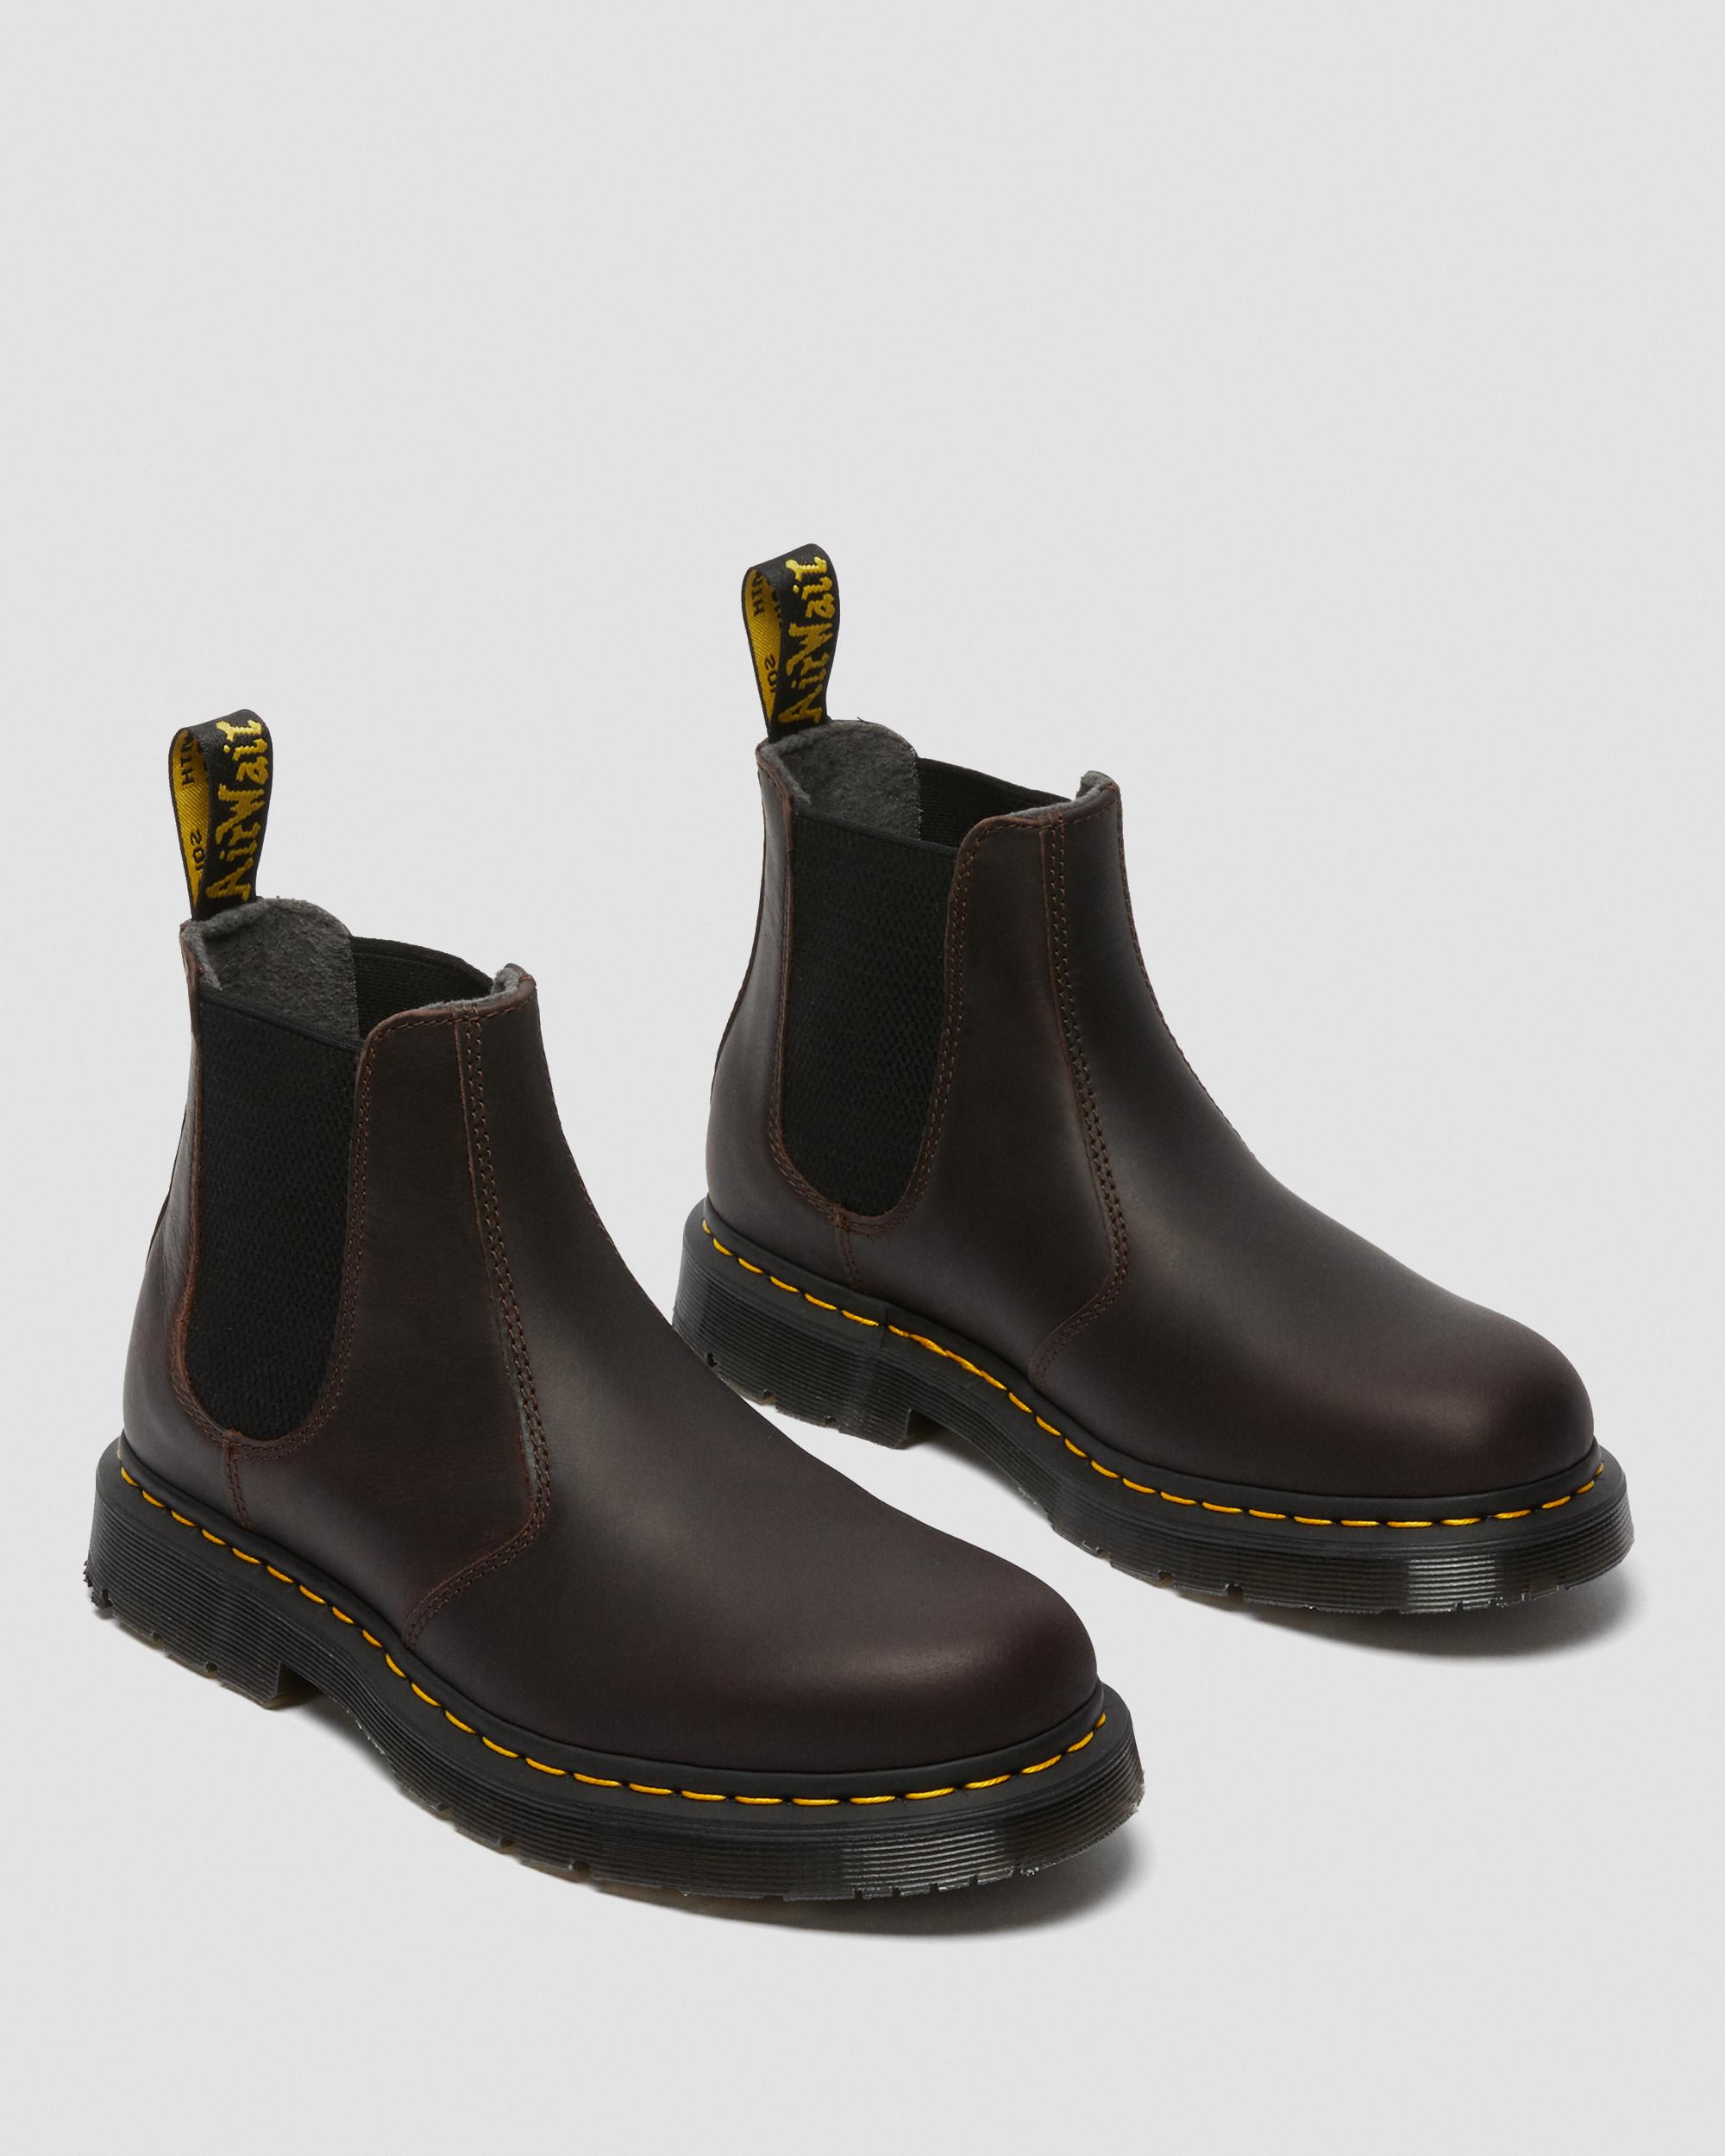 2976DM's Wintergrip Chelsea Boots in Cocoa